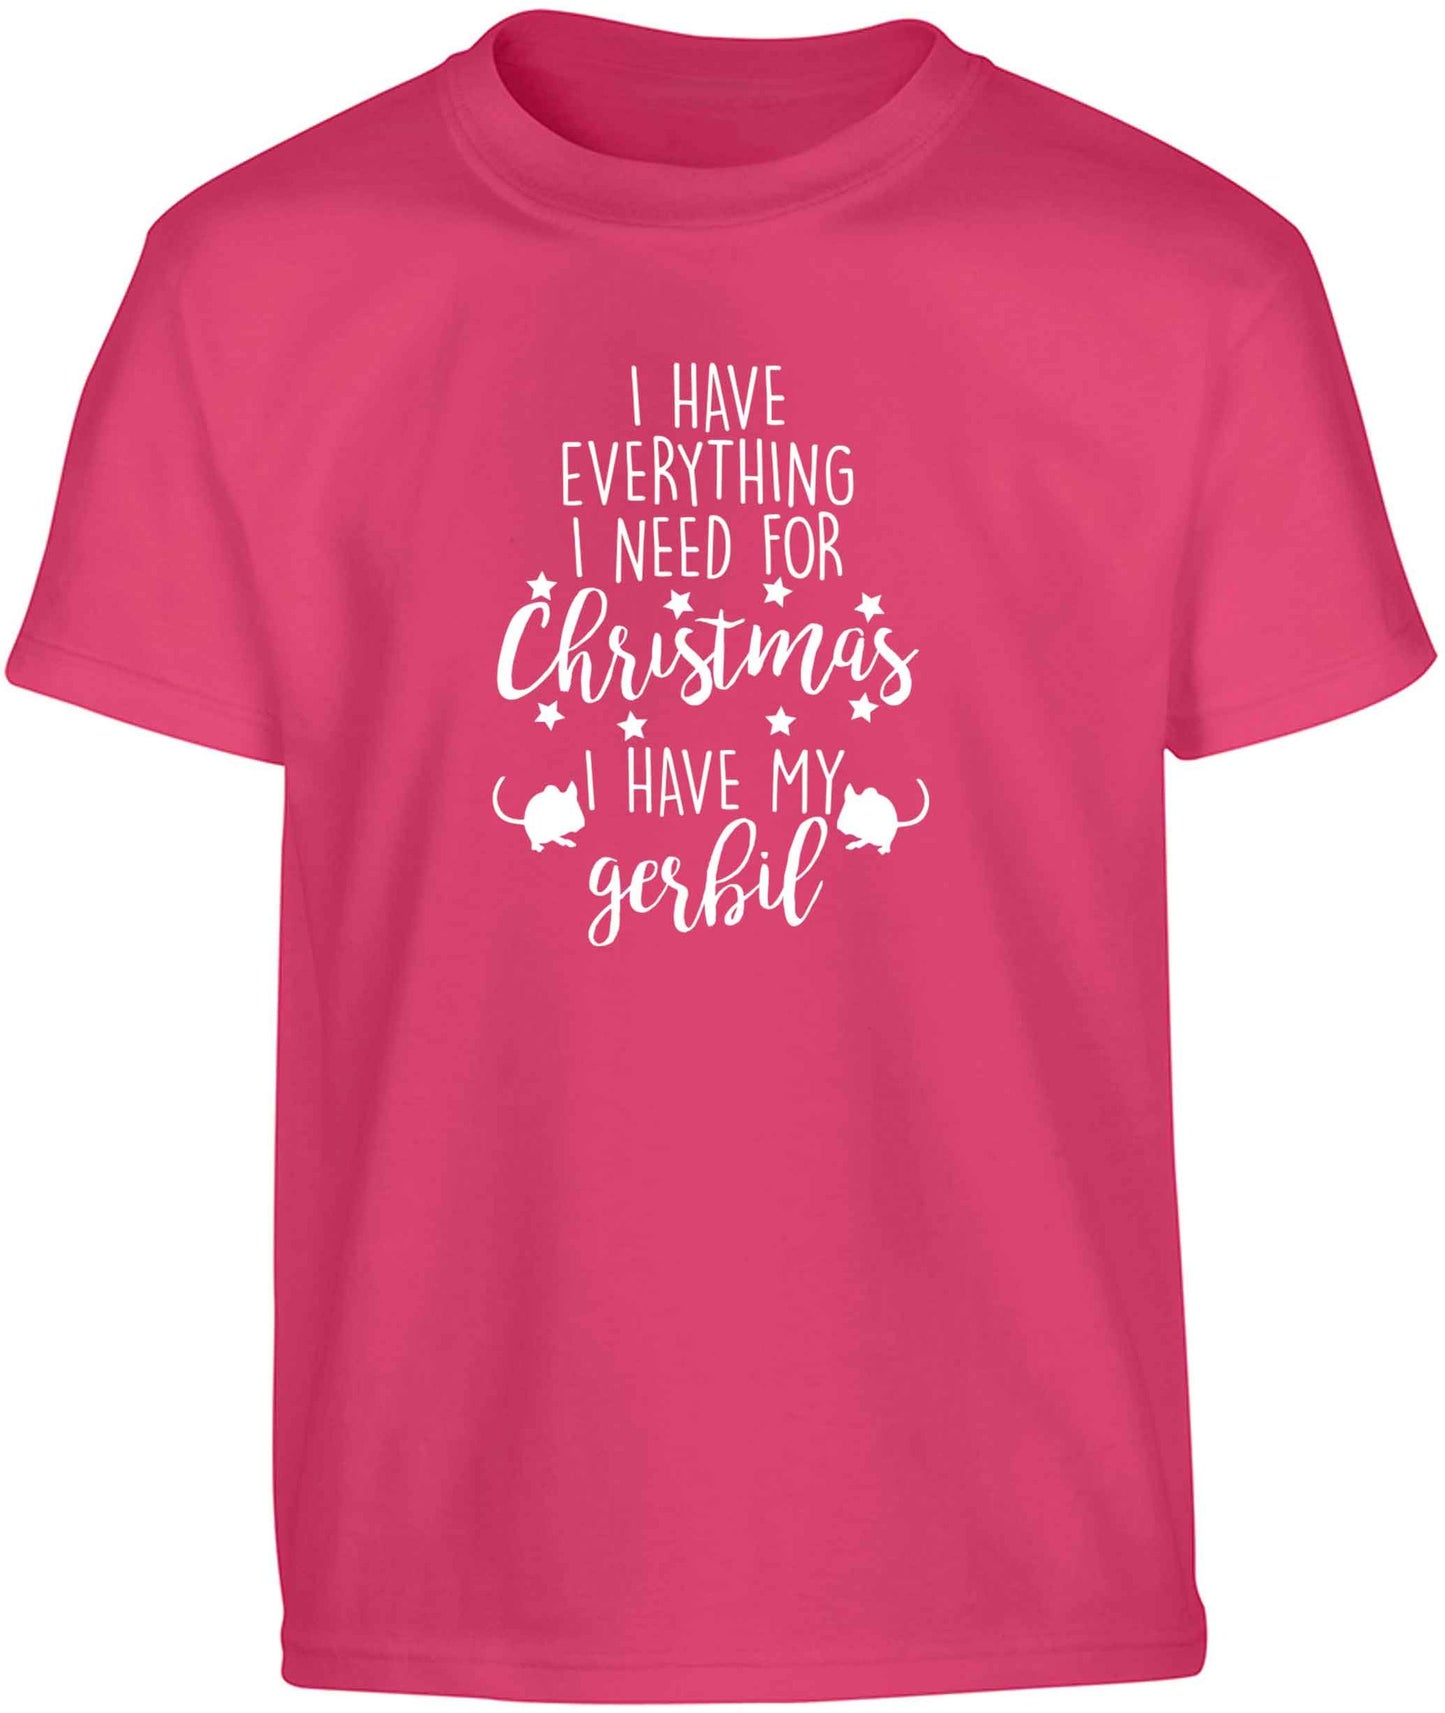 I have everything I need for Christmas I have my gerbil Children's pink Tshirt 12-13 Years